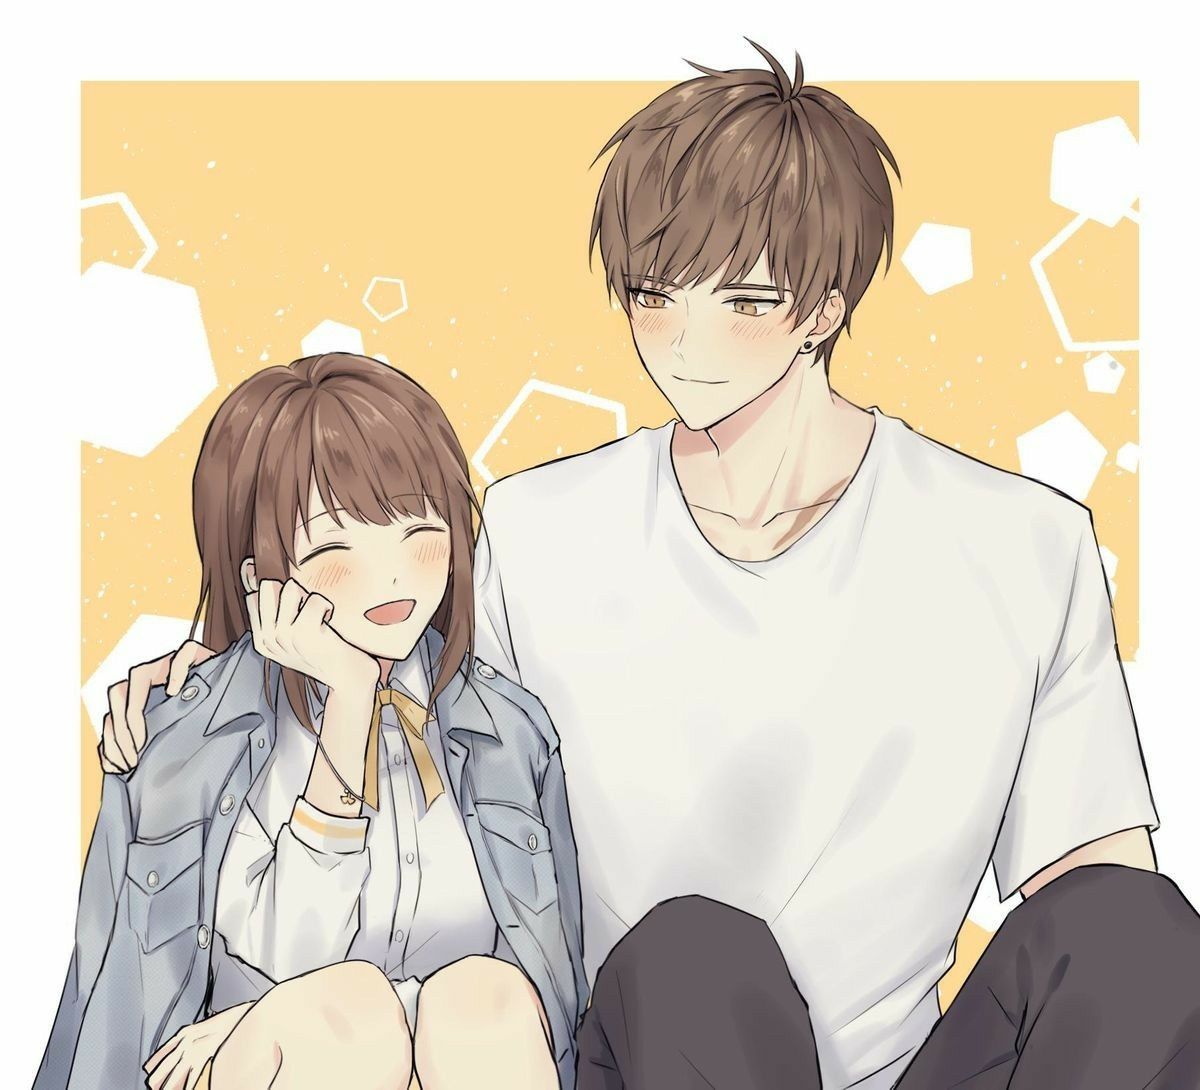 Poster World Anime Couple Cute Anime Series Hd Matte Finish Paper Poster  Print 12 x 18 Inch Multicolor PW26142  Amazonin Home  Kitchen